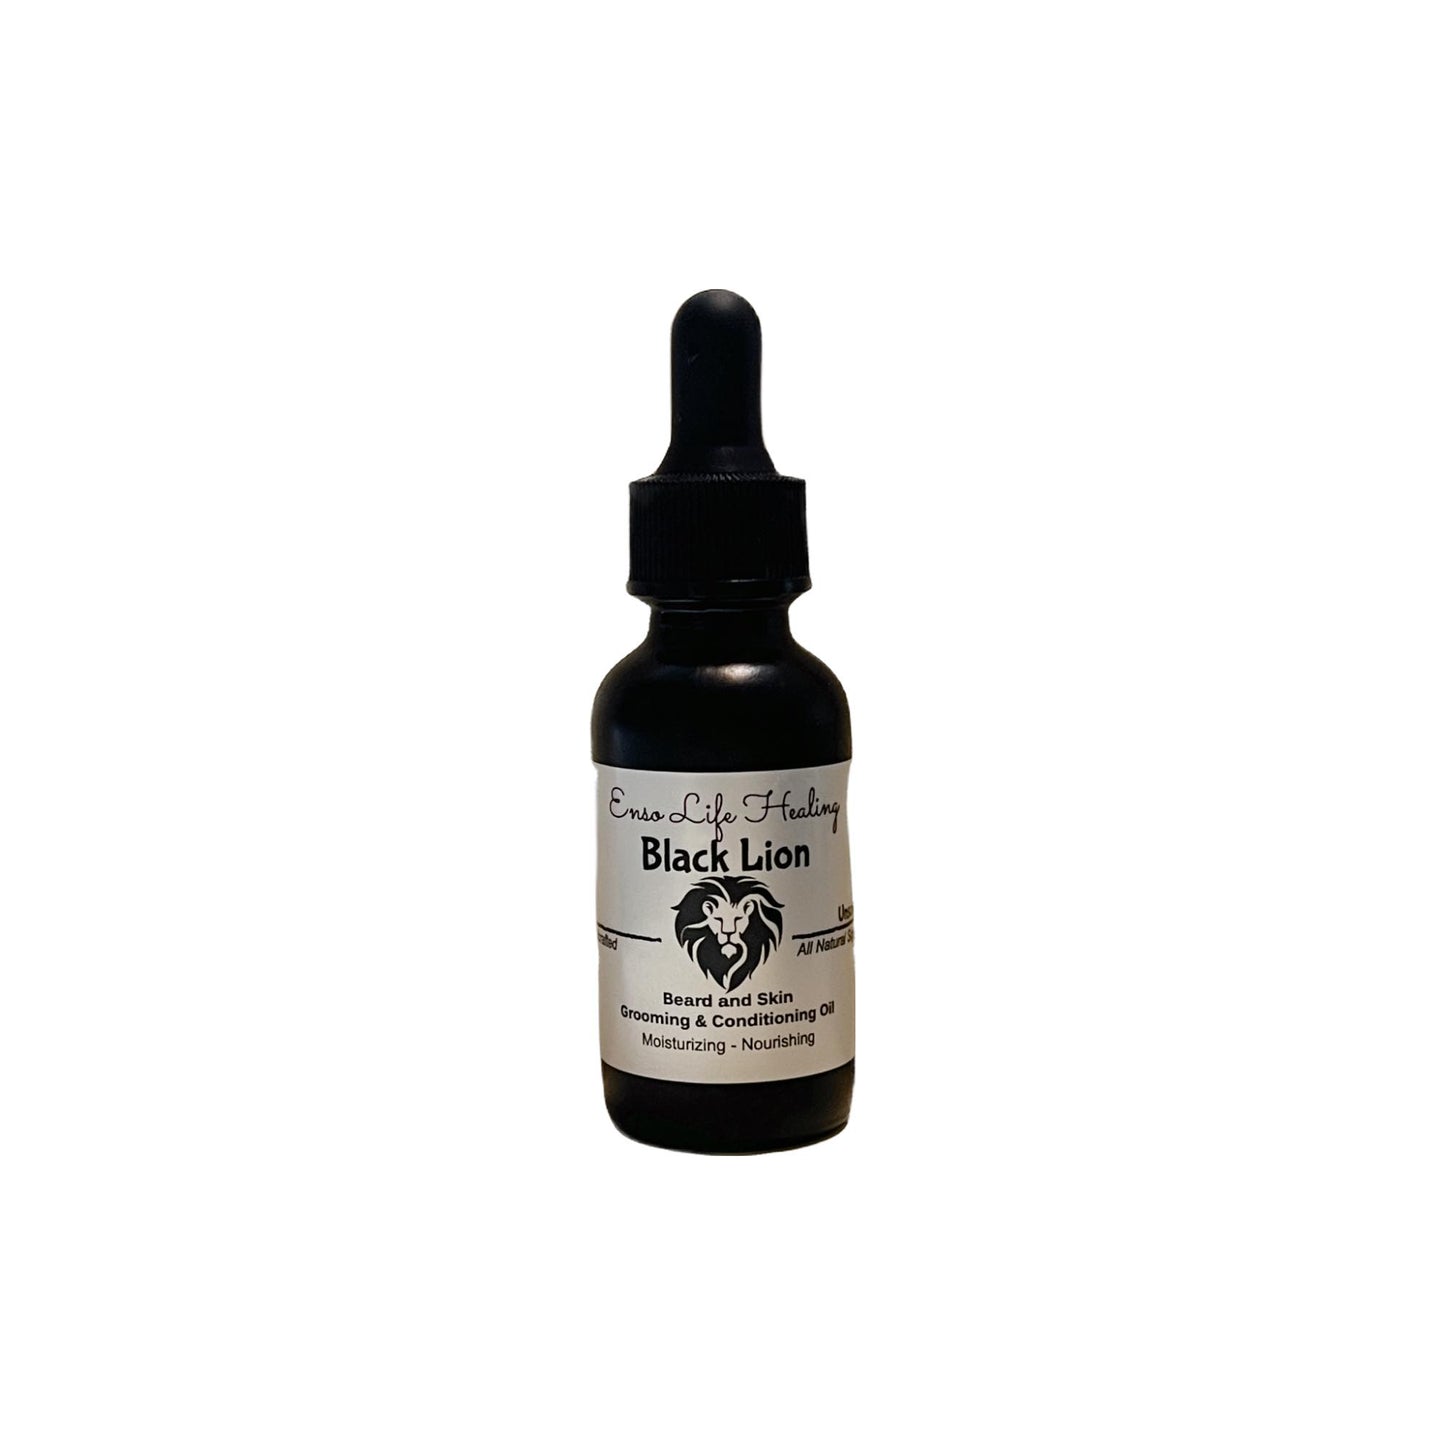 Black Lion Beard and Skin Grooming and Conditioning Oil